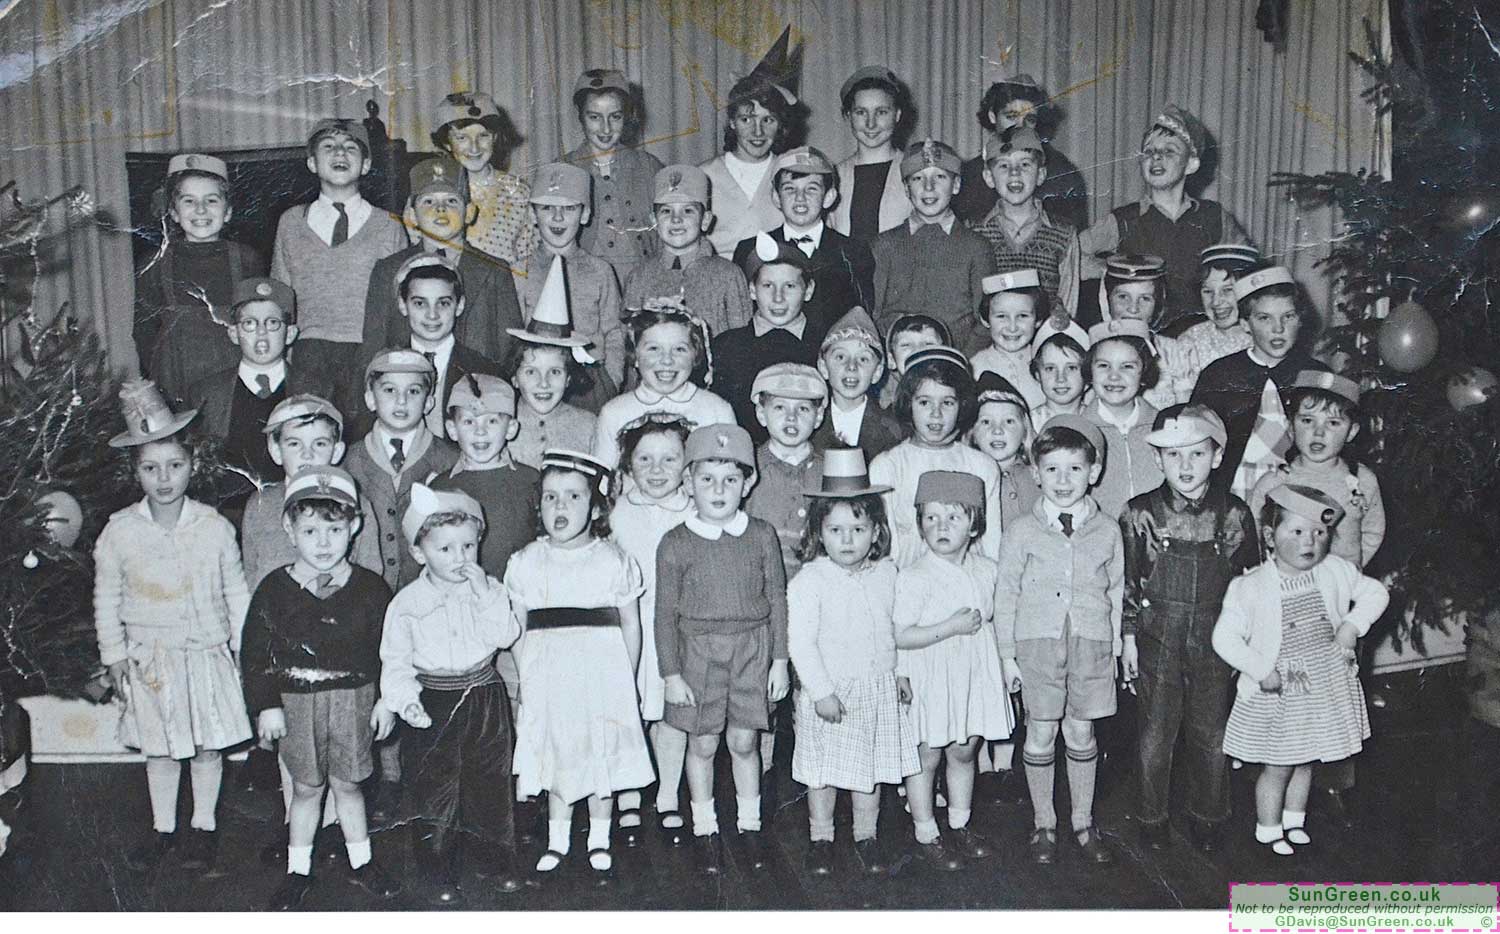 A photo of children of employees of the J Allen Rubber Co at a party in the 1950s